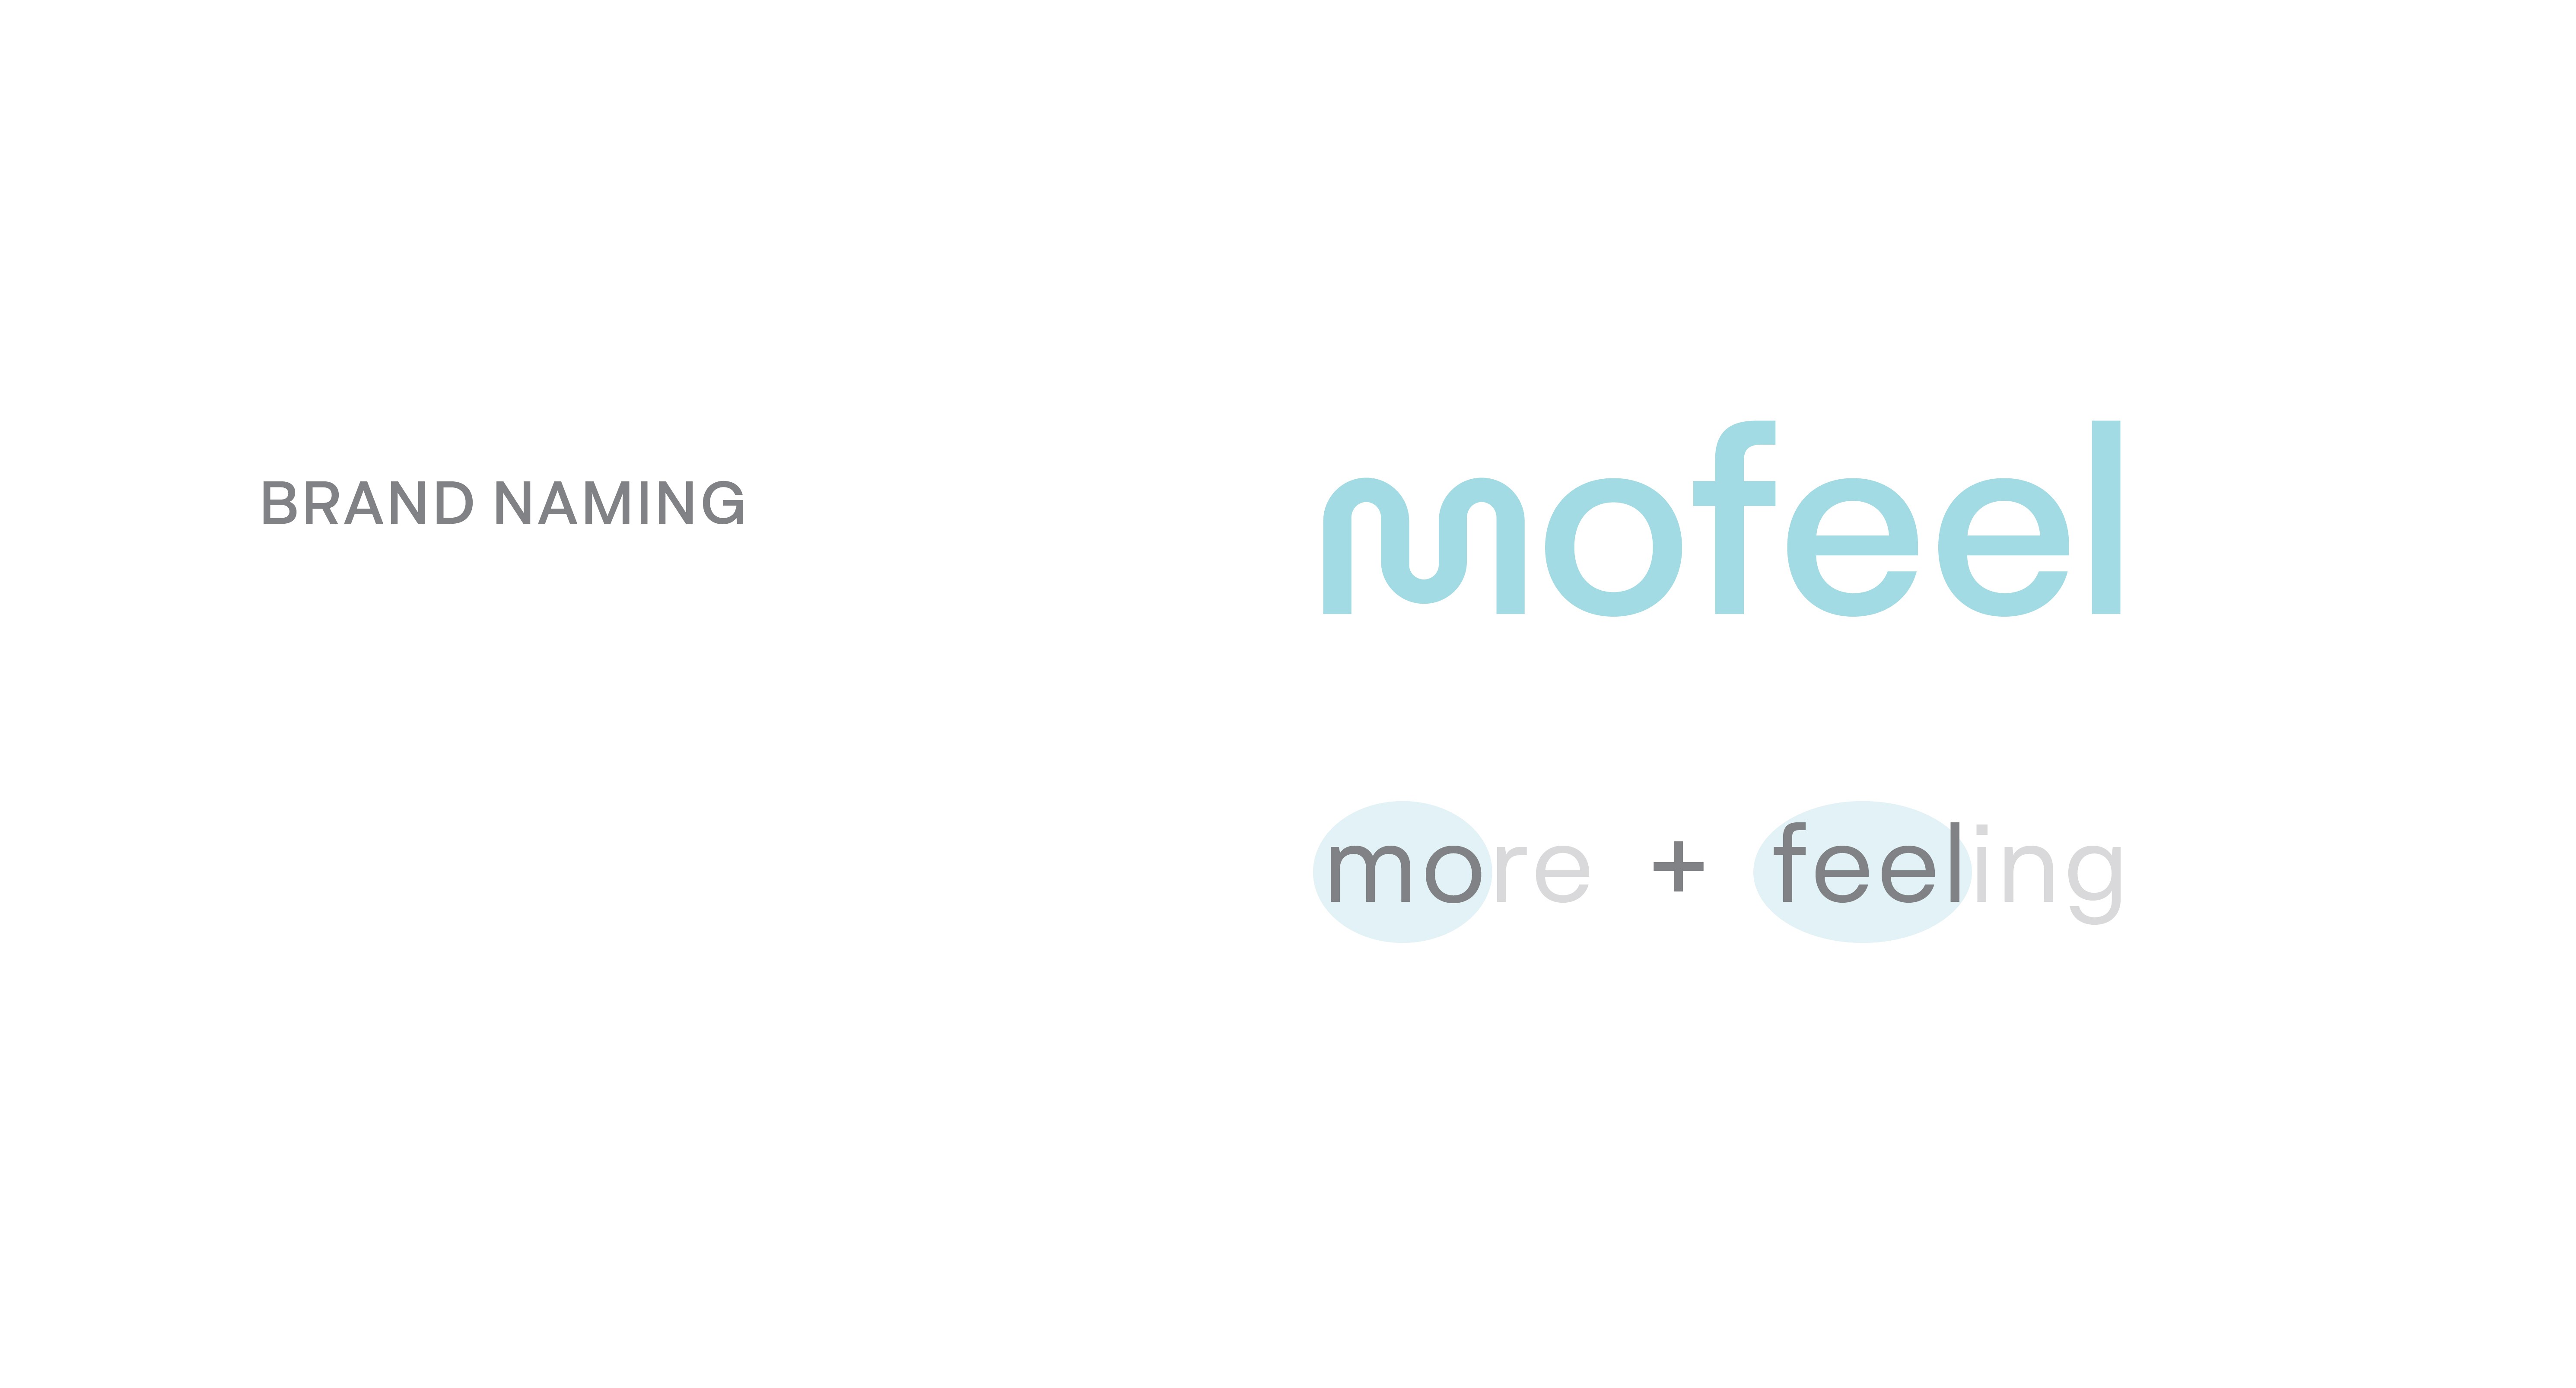 ECH Creative Agency Help Mofeel Connect Humans, Nature and Technology for an Ideal Future